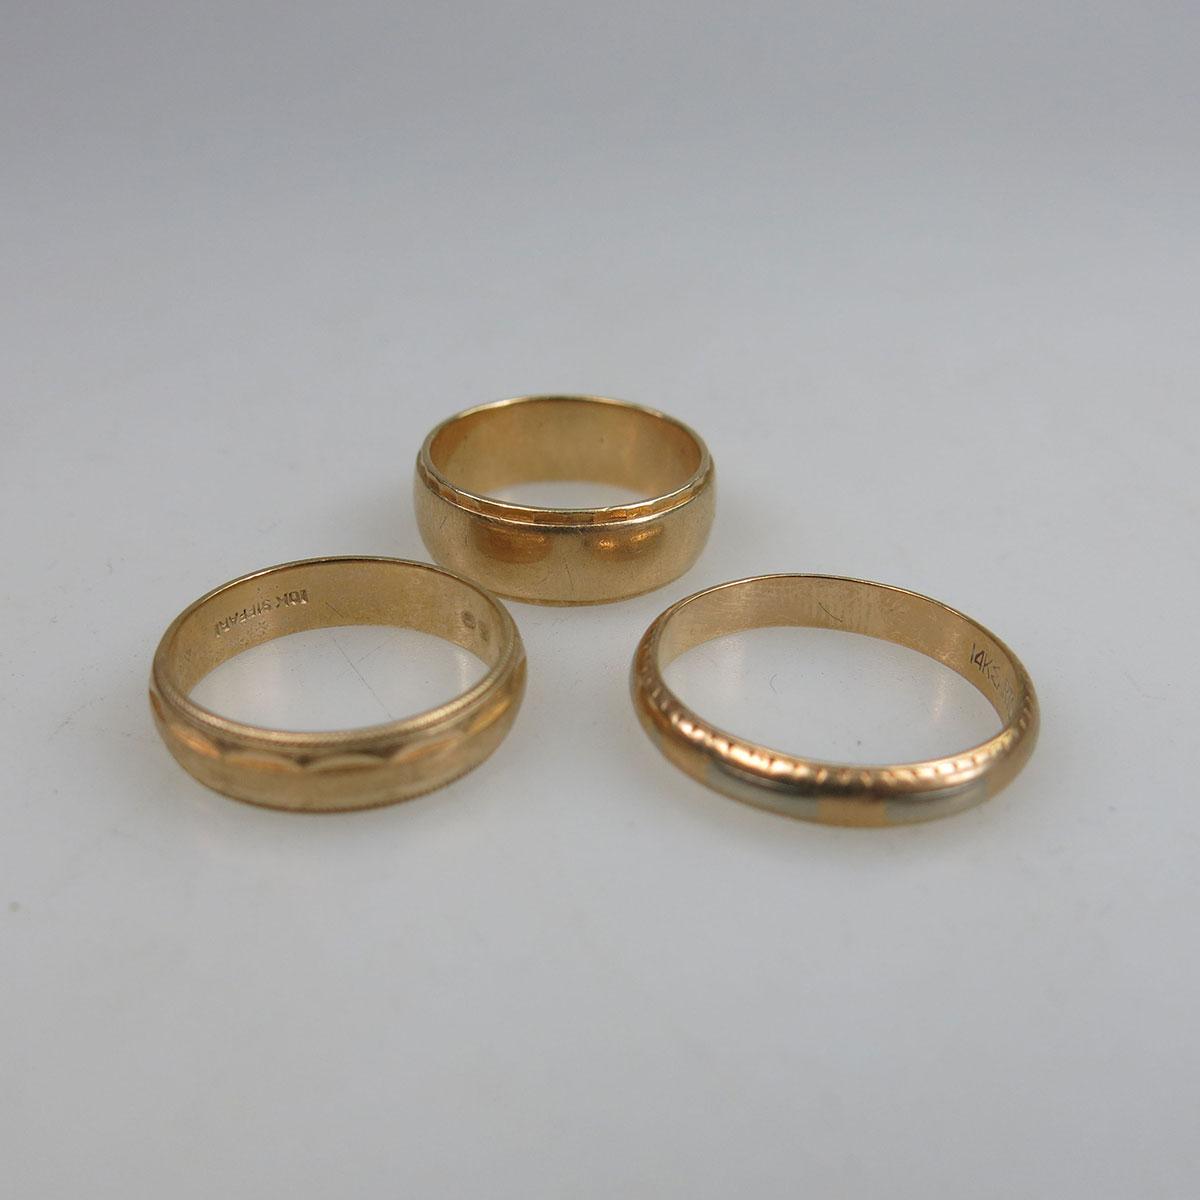 1 x 10k & 2 x 14k Yellow Gold Bands